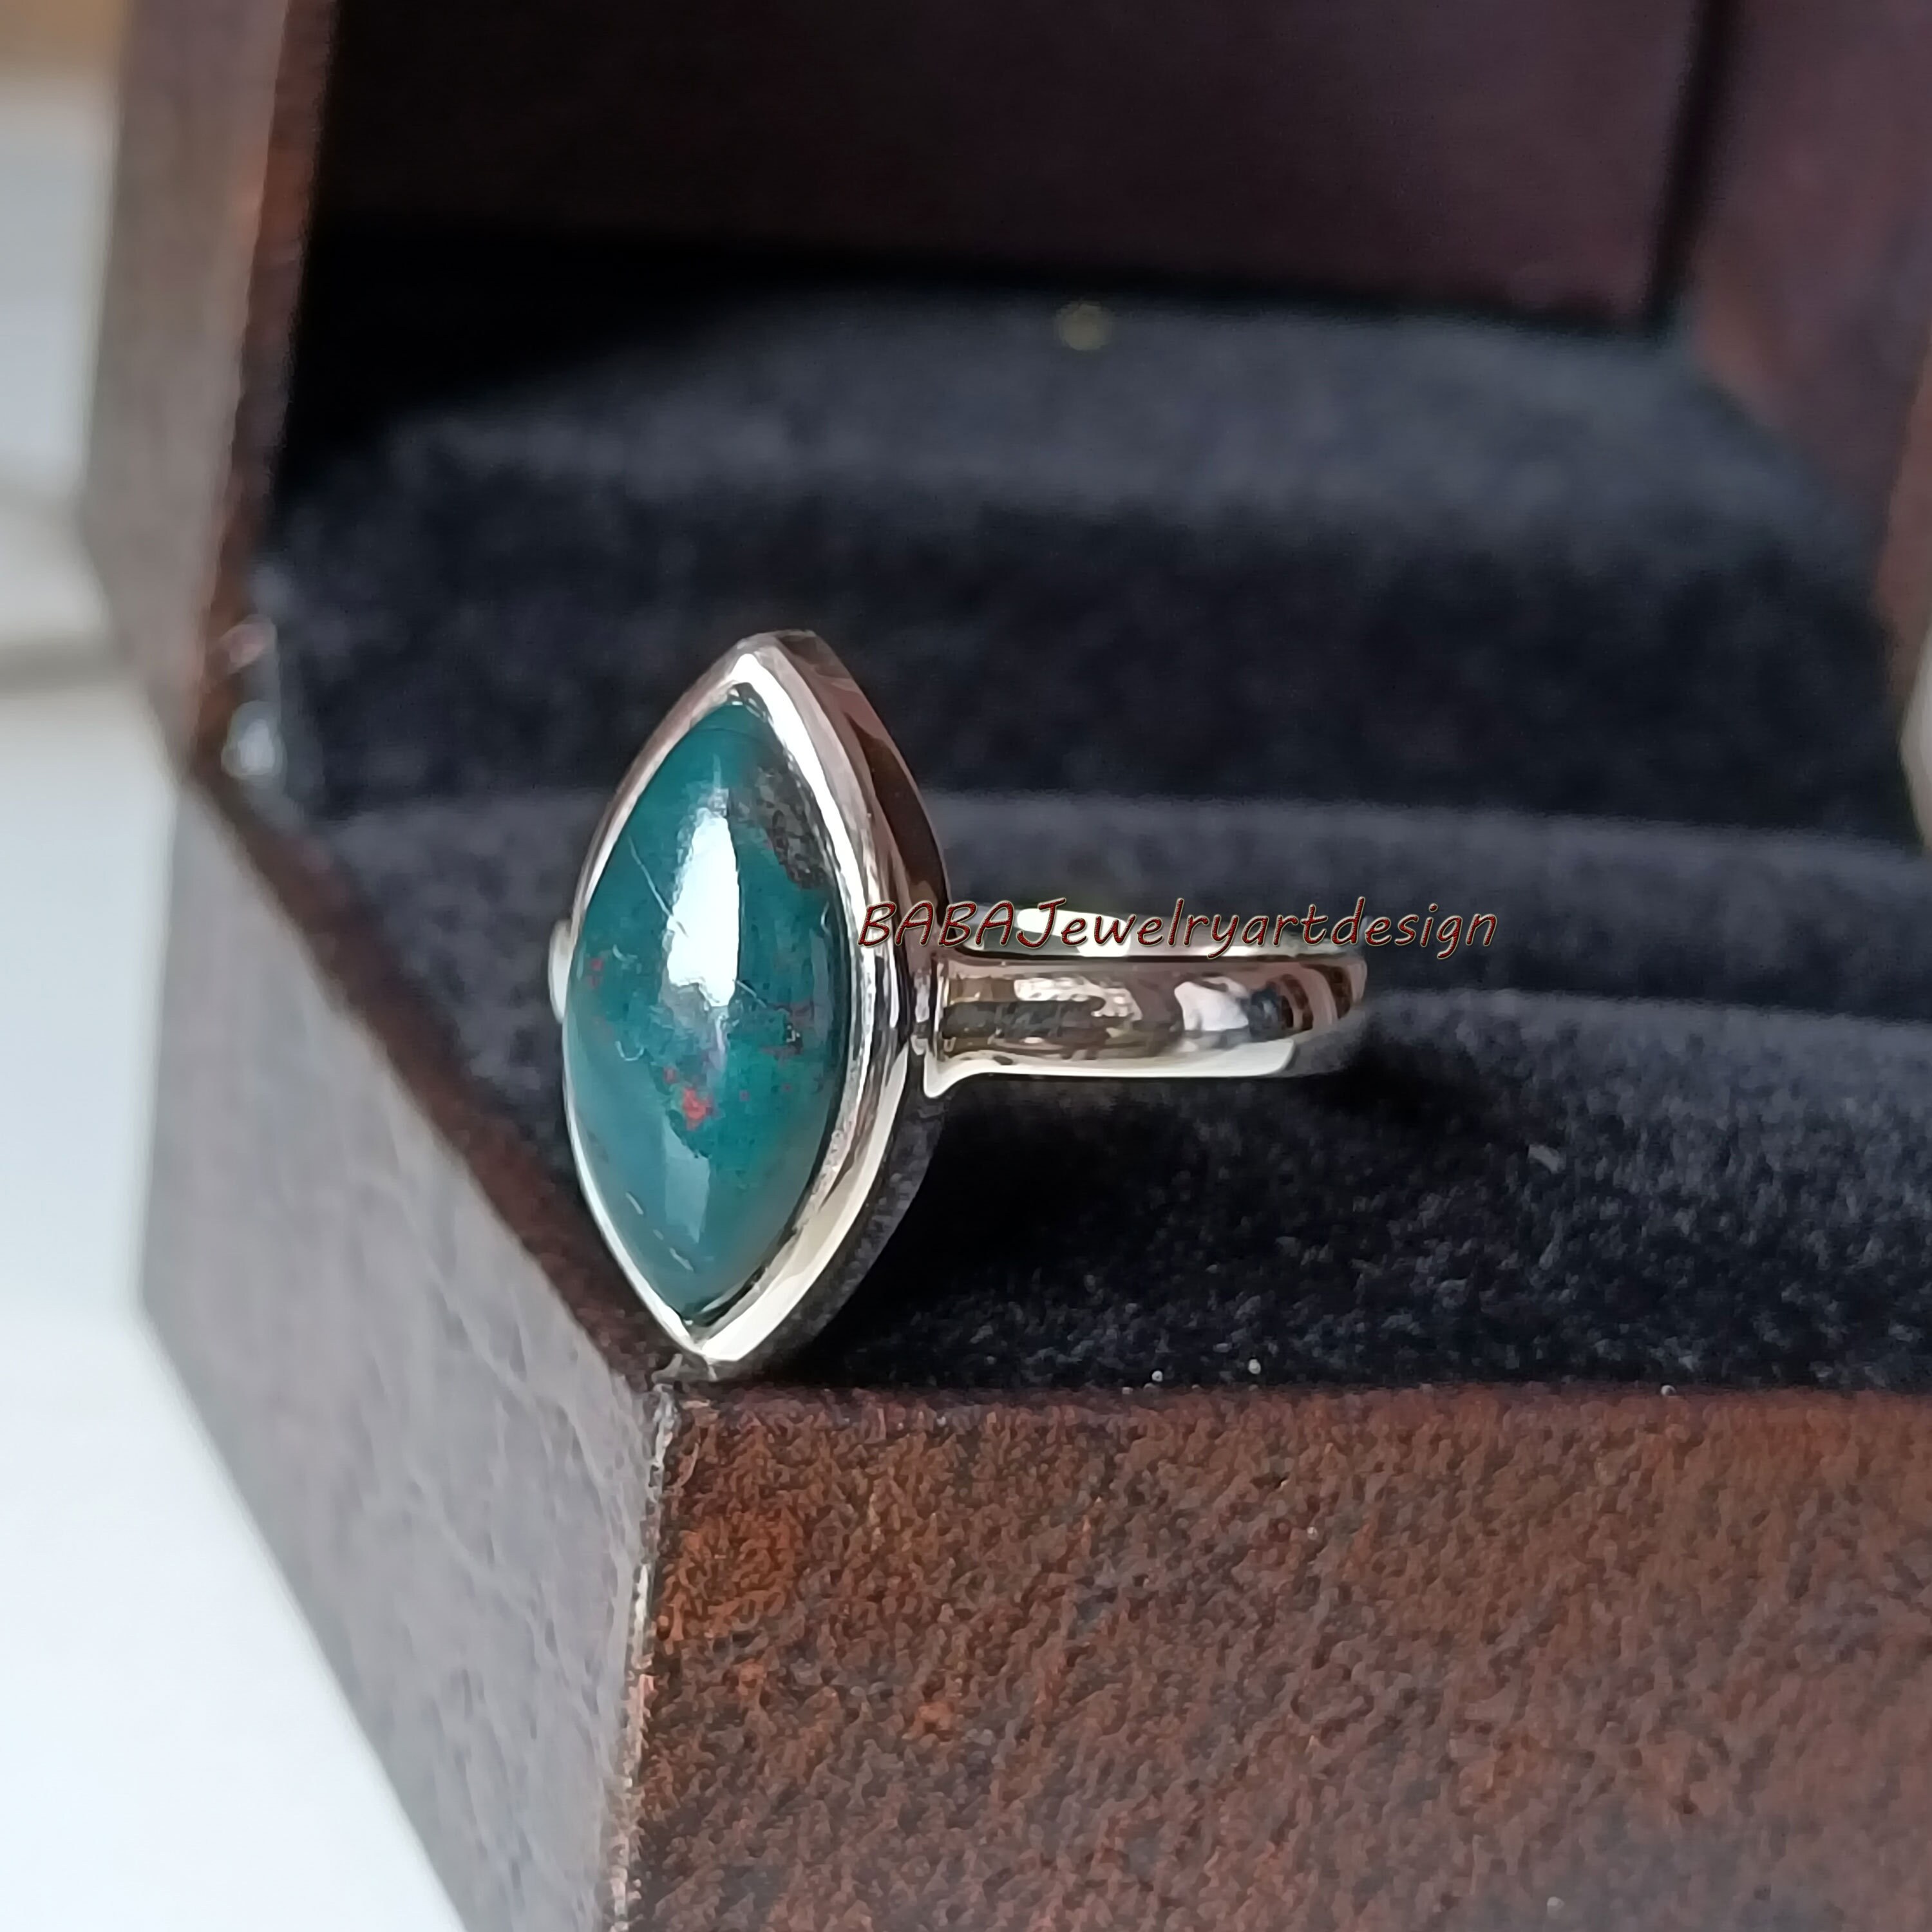 Blood Stone Solid 925 Sterling Silver Ring/Natural Oval Cab Bloodstone Gemstone Ring/Gorgeous Bloodstone Silver Ring/Handmade Jewelry/Mens Ring/Gift For Him/Best Gift For MEns 